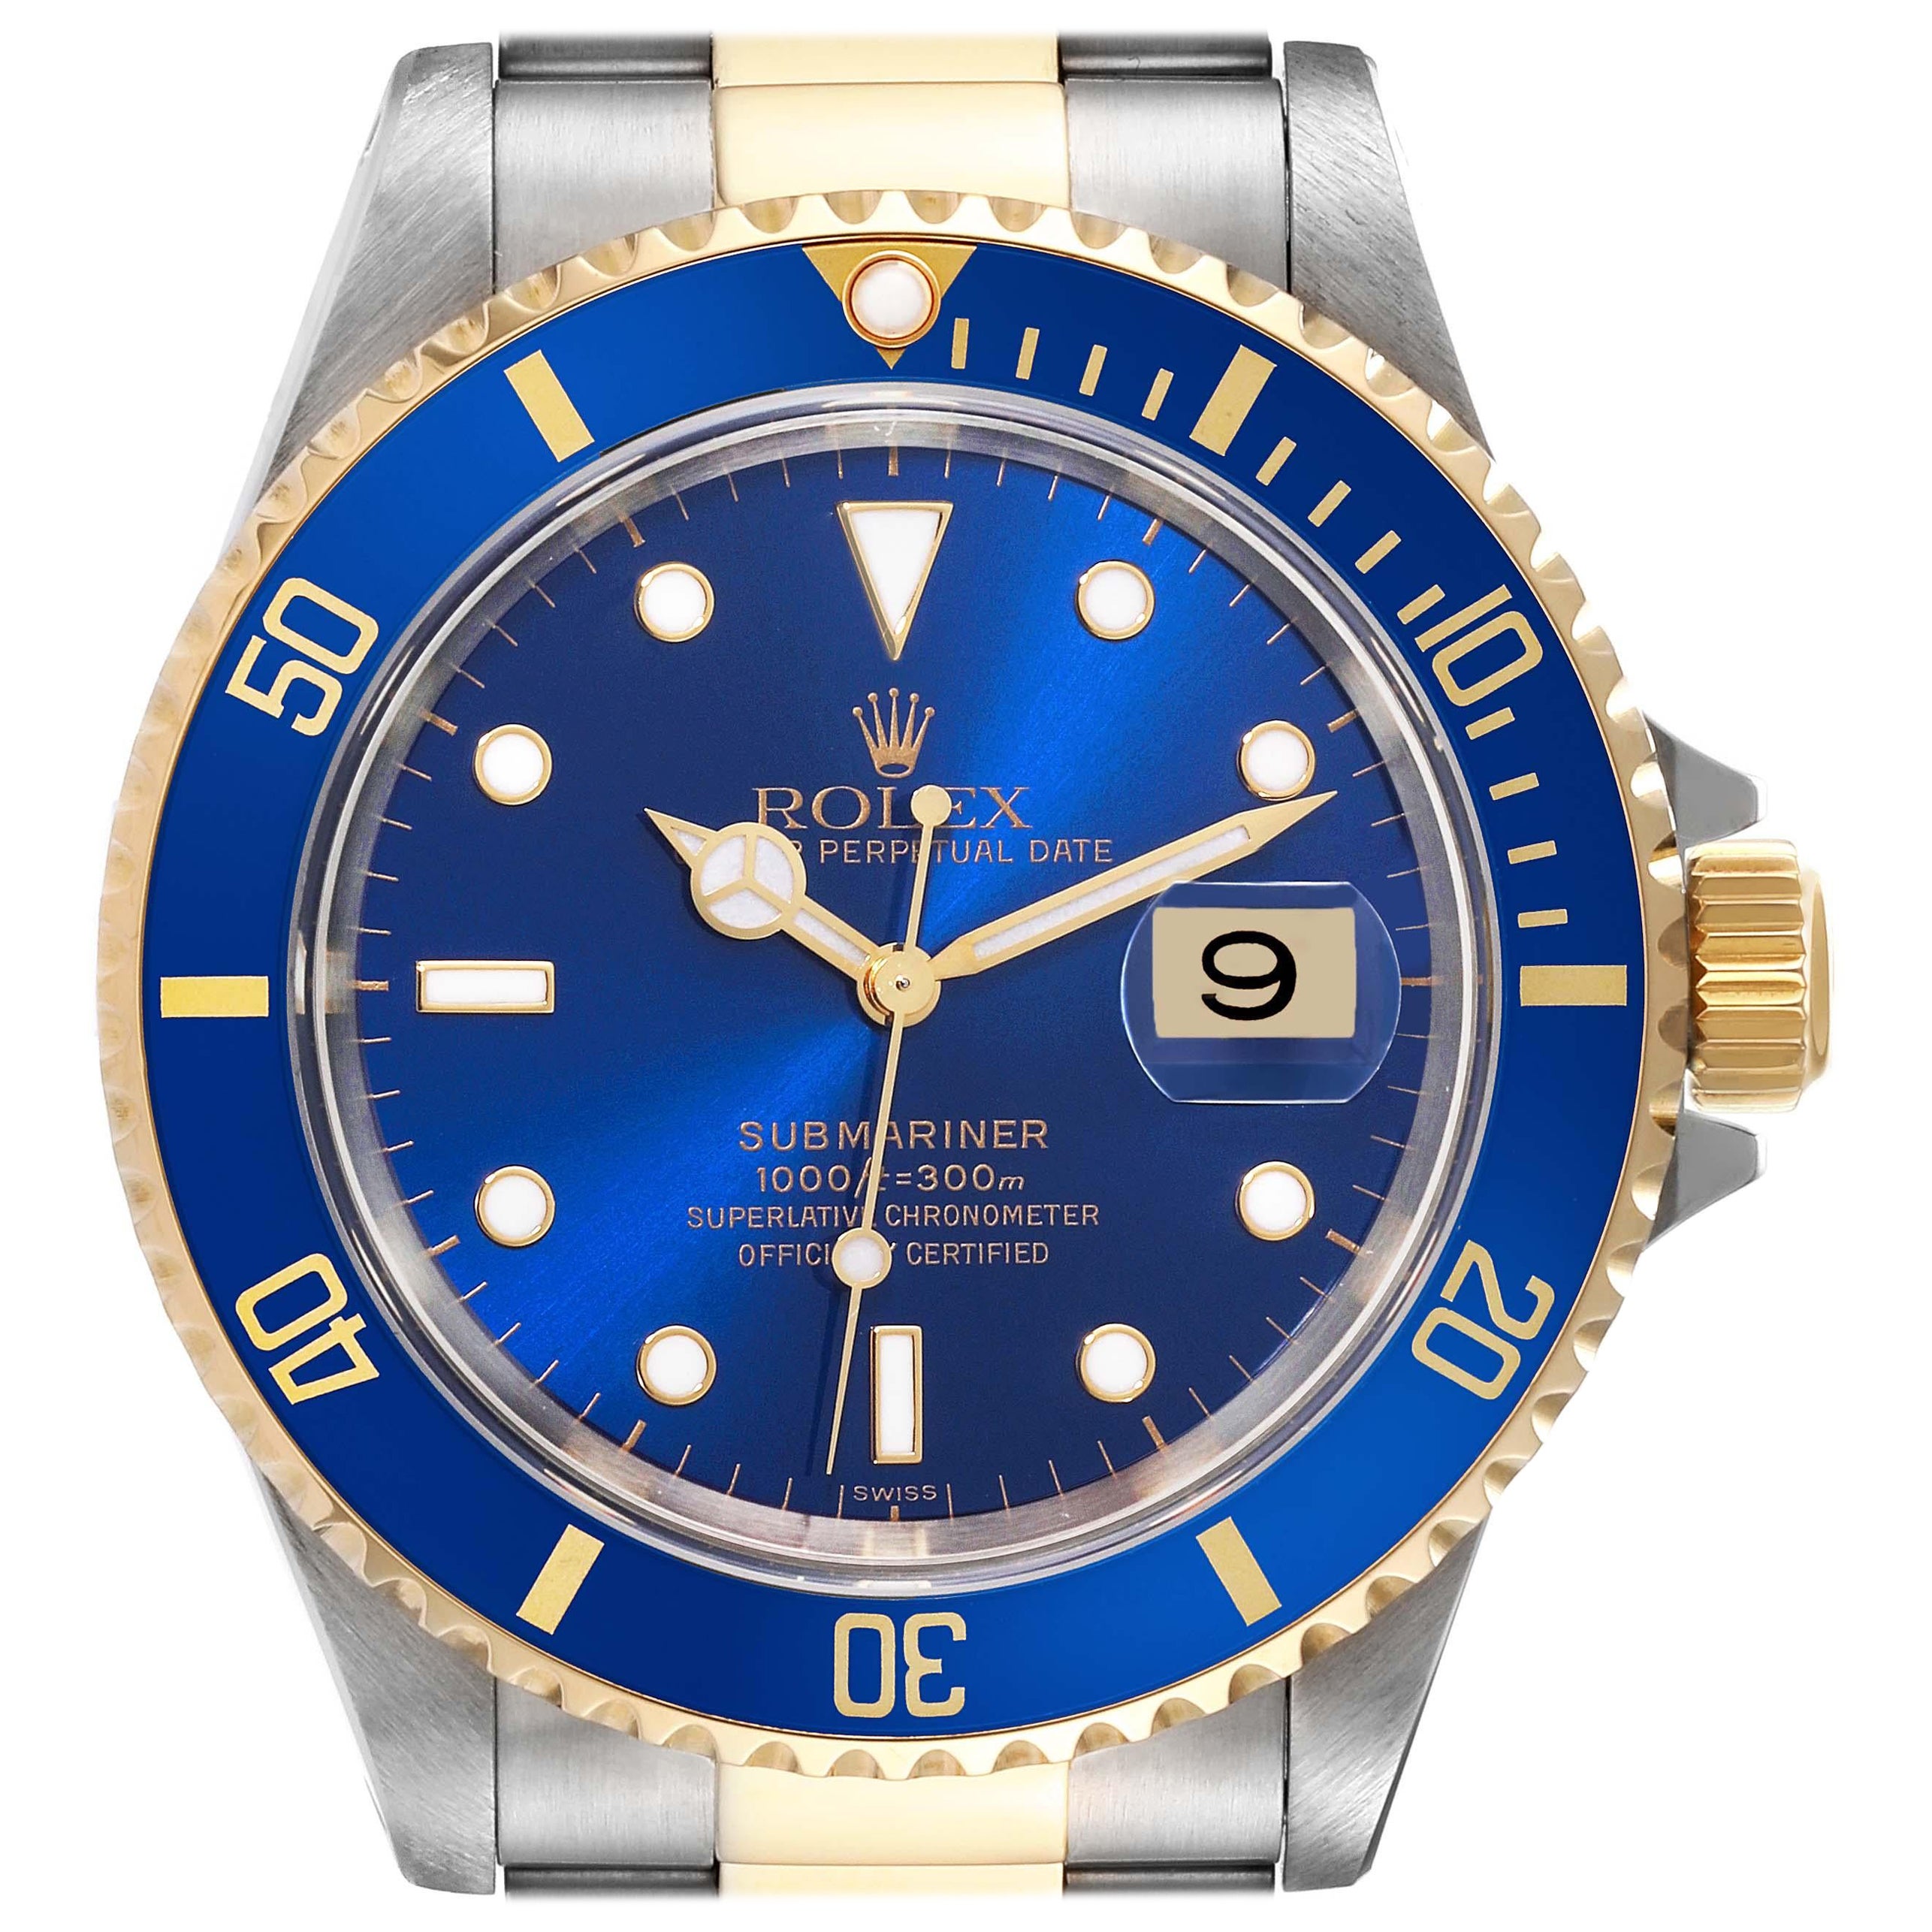 Certified Authentic Rolex Submariner15599 Blue Dial For Sale at 1stDibs